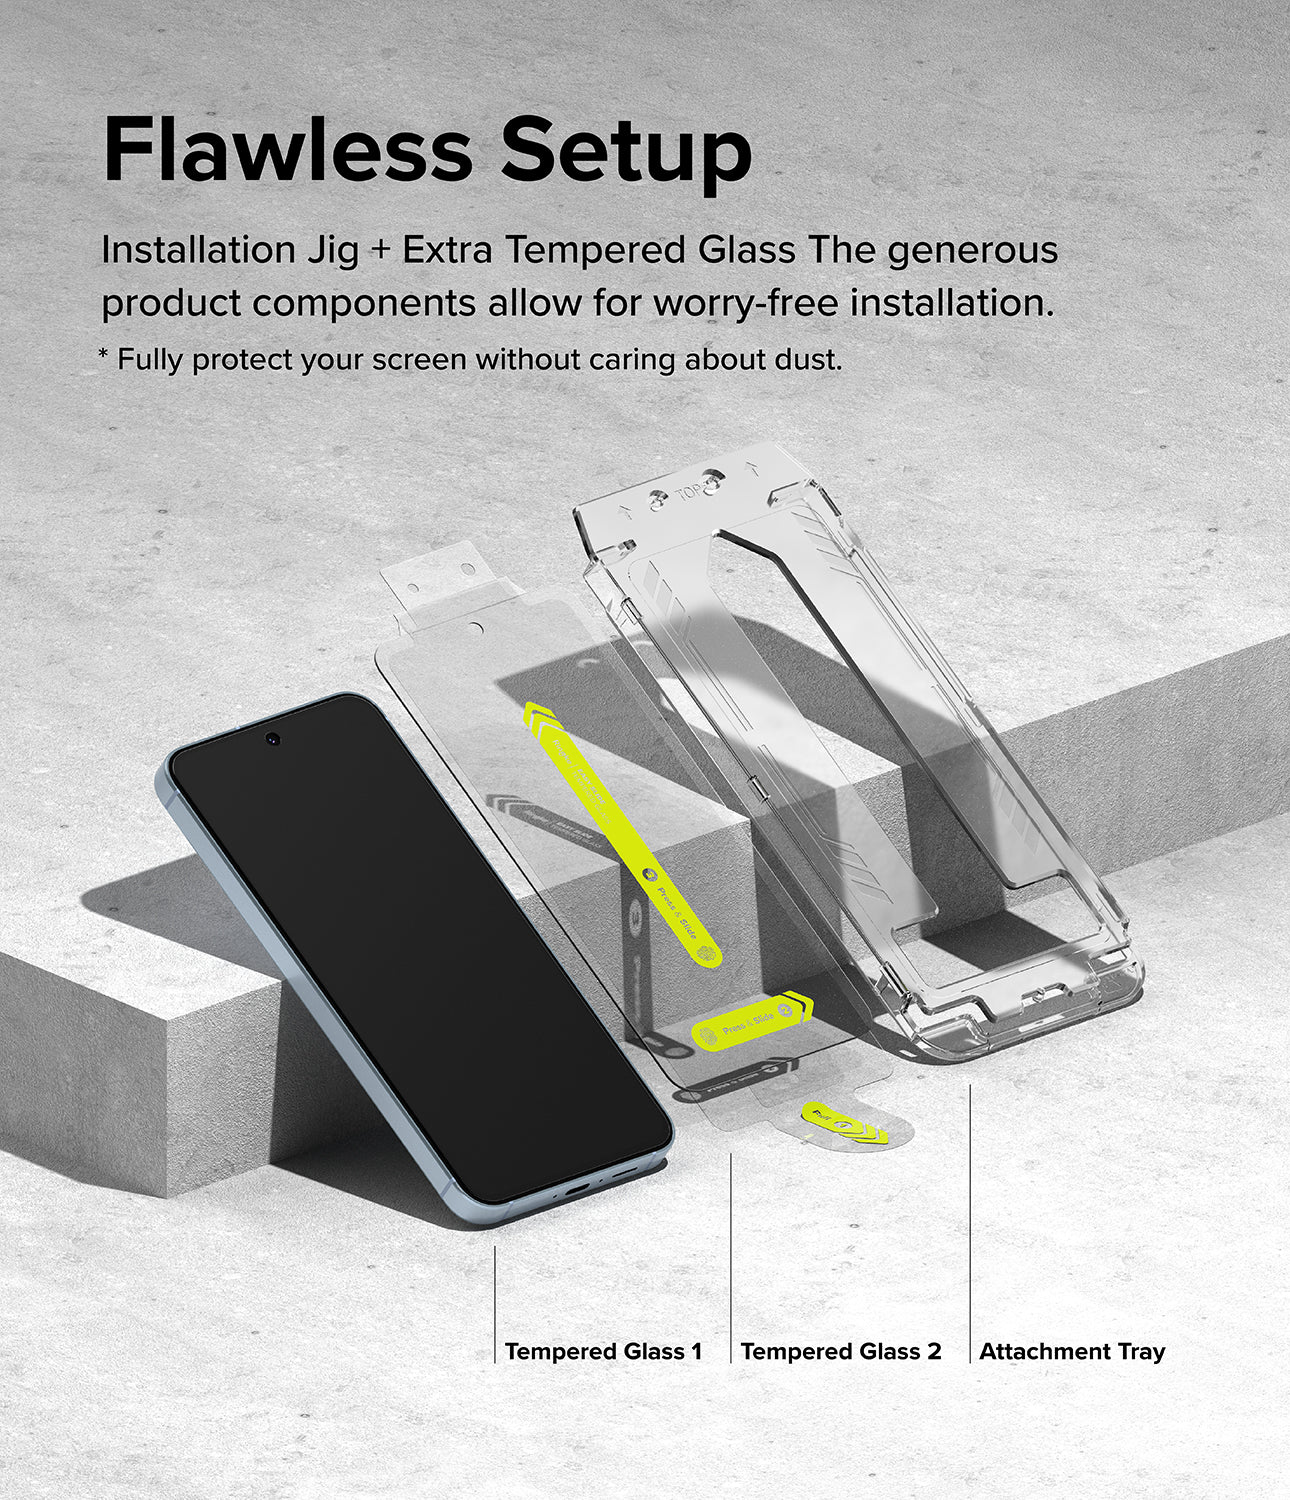 Galaxy A35 Screen Protector | Easy Slide Tempered Glass - Flawless Setup. Installation Jig + Extra Tempered Glass. The generous product components allow for worry-free installtion.